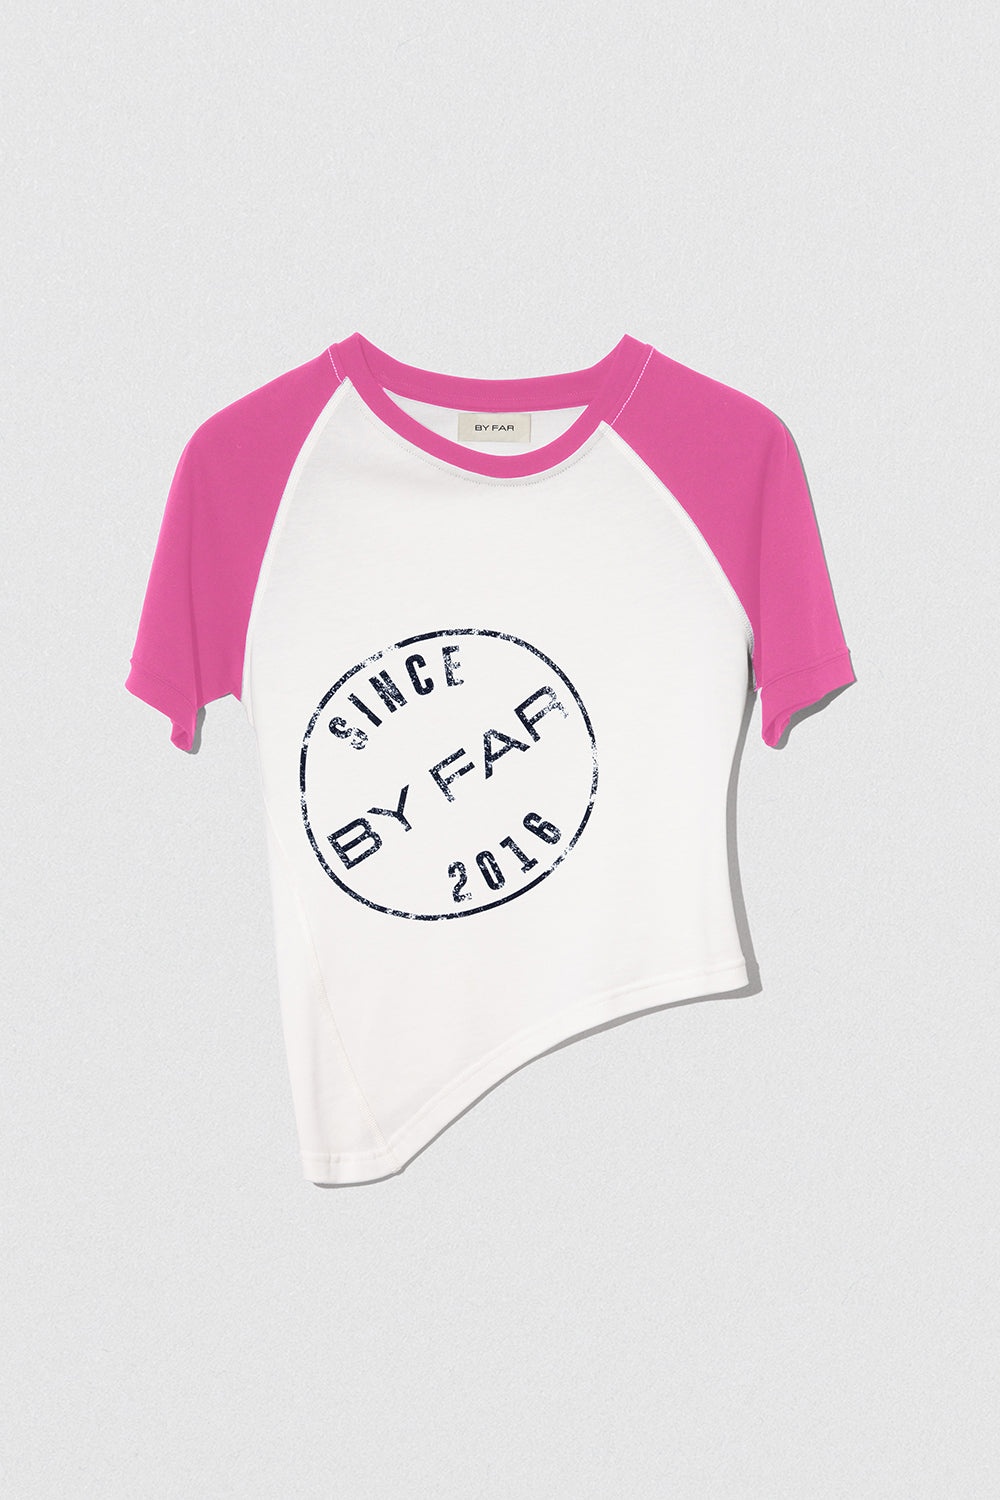 RASCAL BABY T T-SHIRT PINK-OFF WHITE LYOCELL BLEND - 2